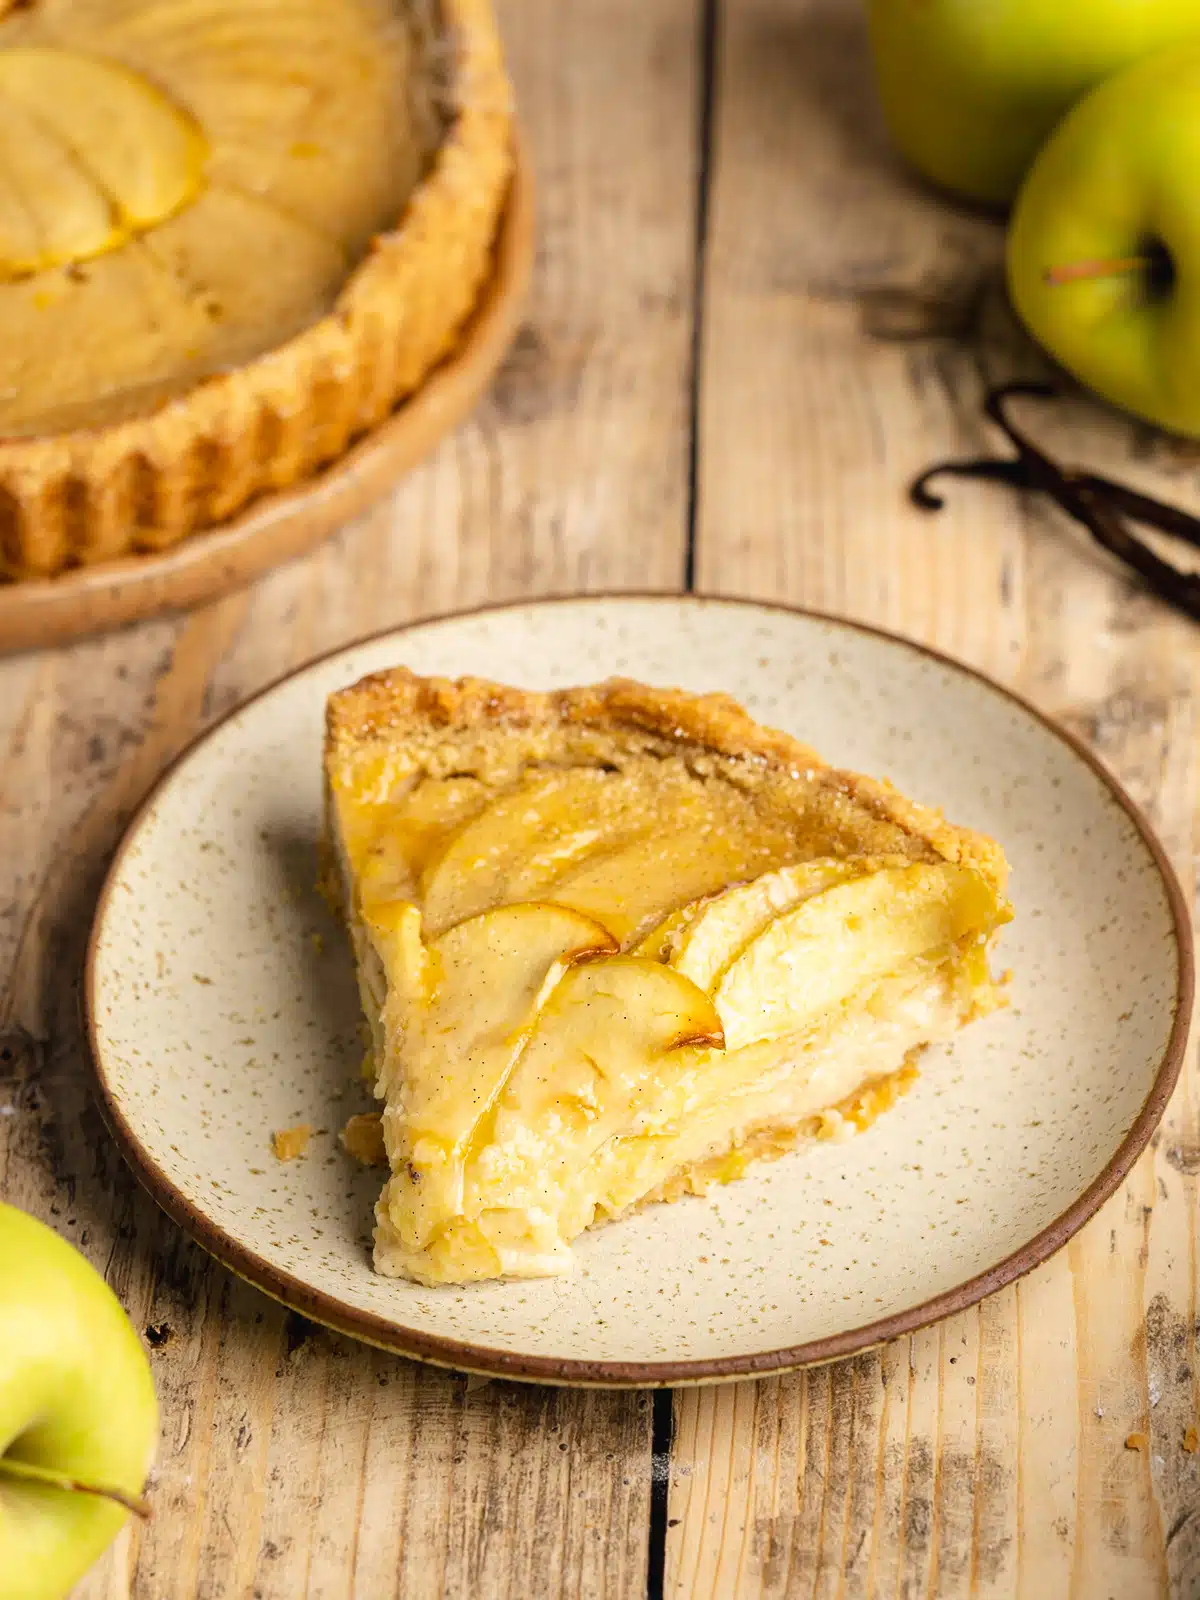 This vegan apple custard tart features a buttery shortcrust pastry, a dreamy vanilla custard, and thin slices of tender-sweet apples. An eggless and dairy-free spin on Tarte Normande that looks like a million bucks but is a snap to make!